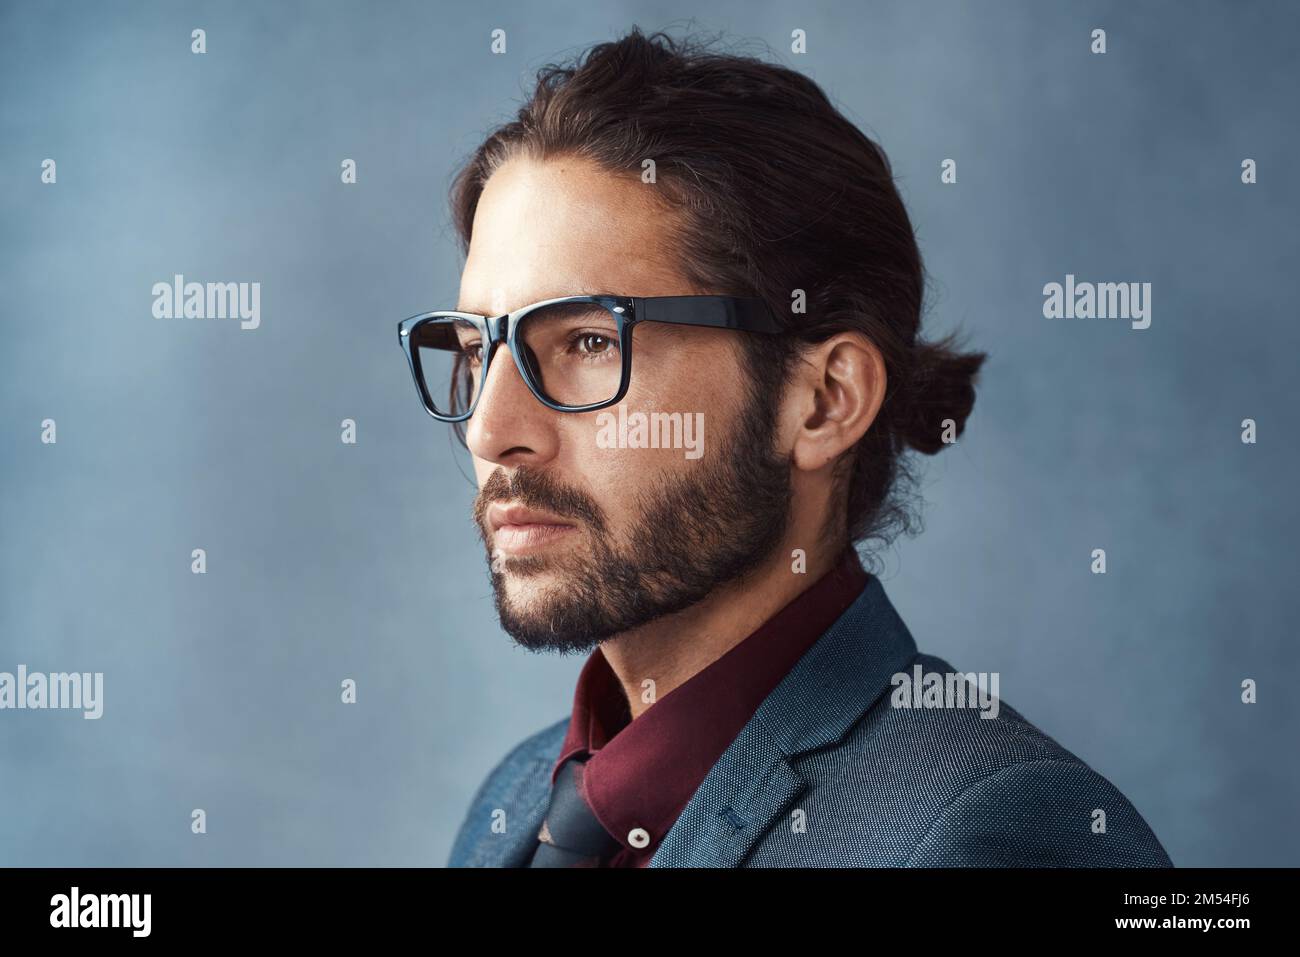 Clarity is key. Studio shot of a handsome young man looking thoughtful against a grey background. Stock Photo